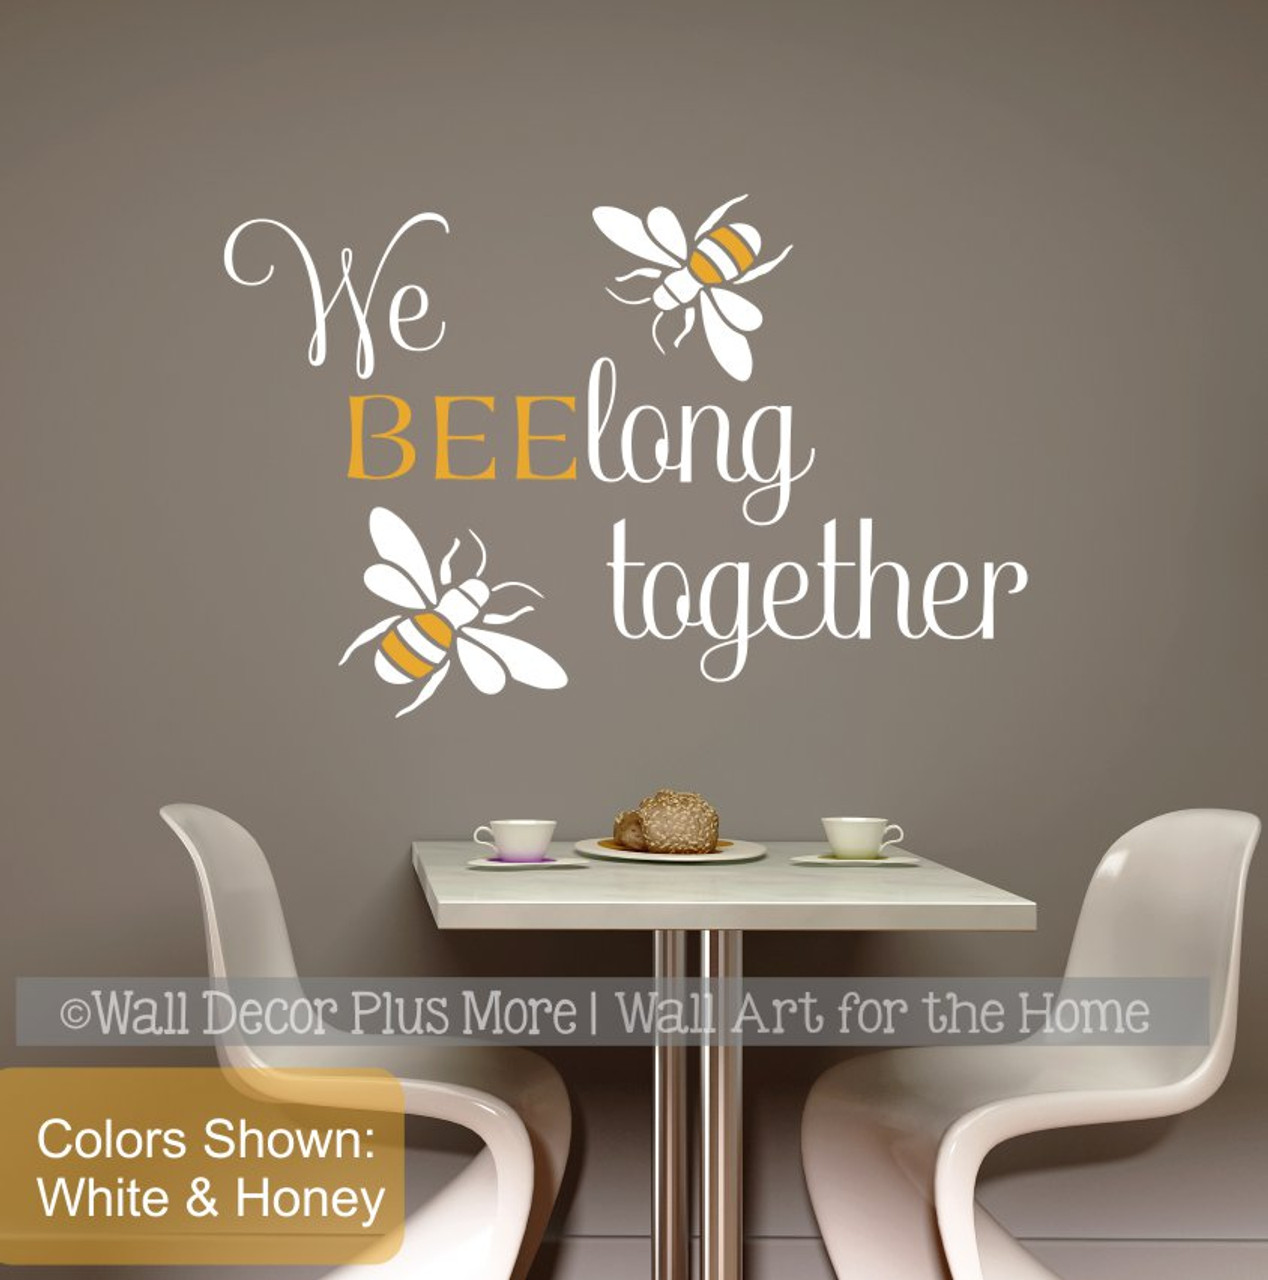 Bee Wall Decals Kitchen Decoration Bumble Bee Stickers Bathroom